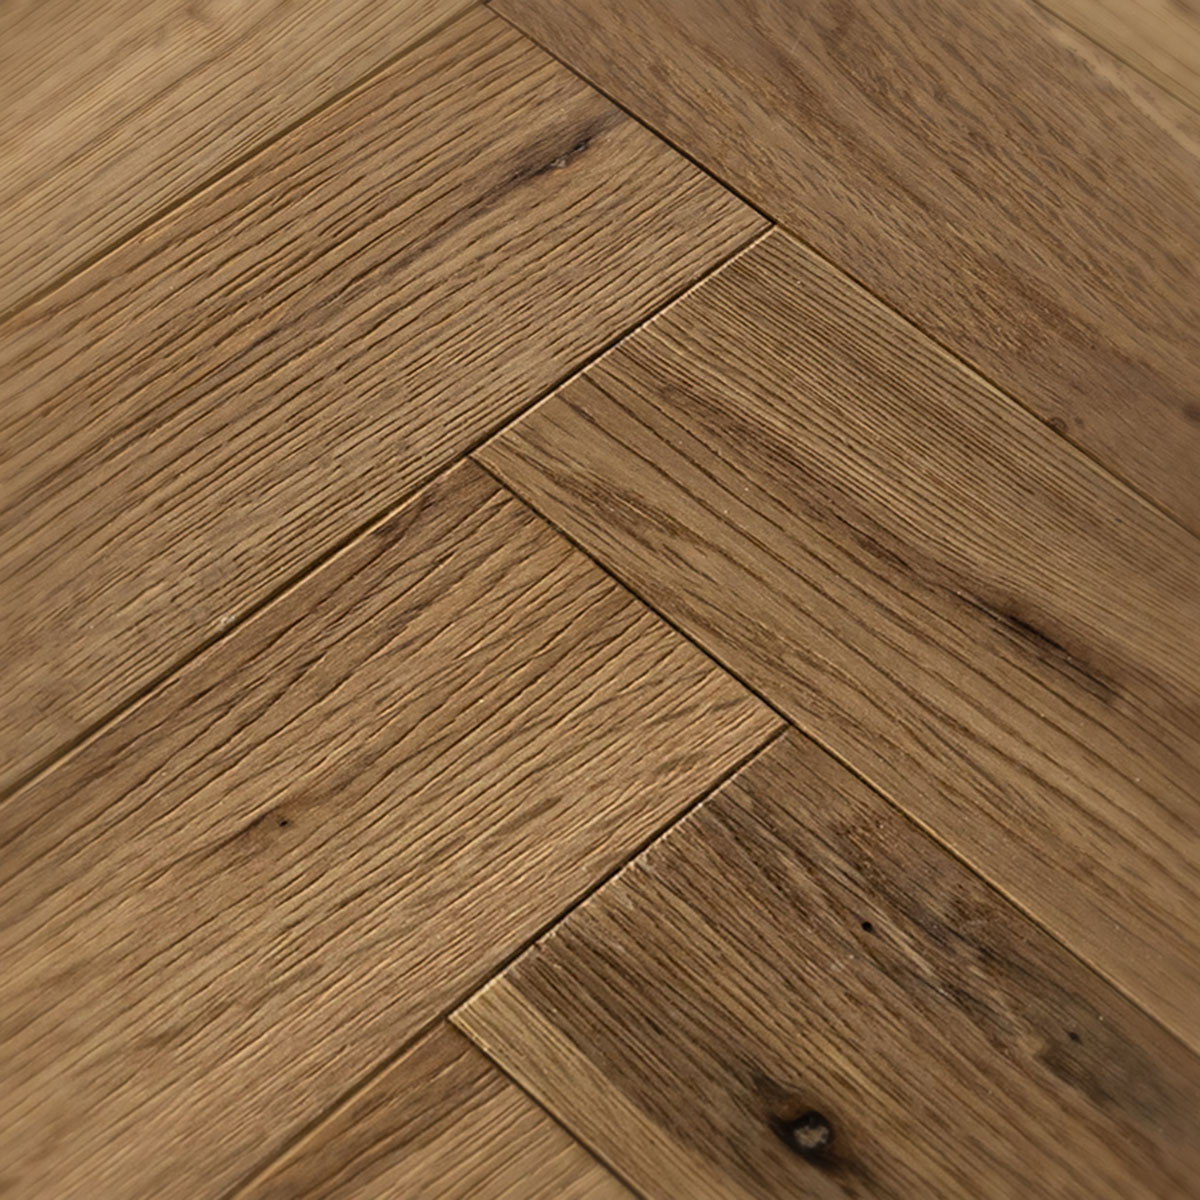 Natural-grade European oak floor with an unfinished look